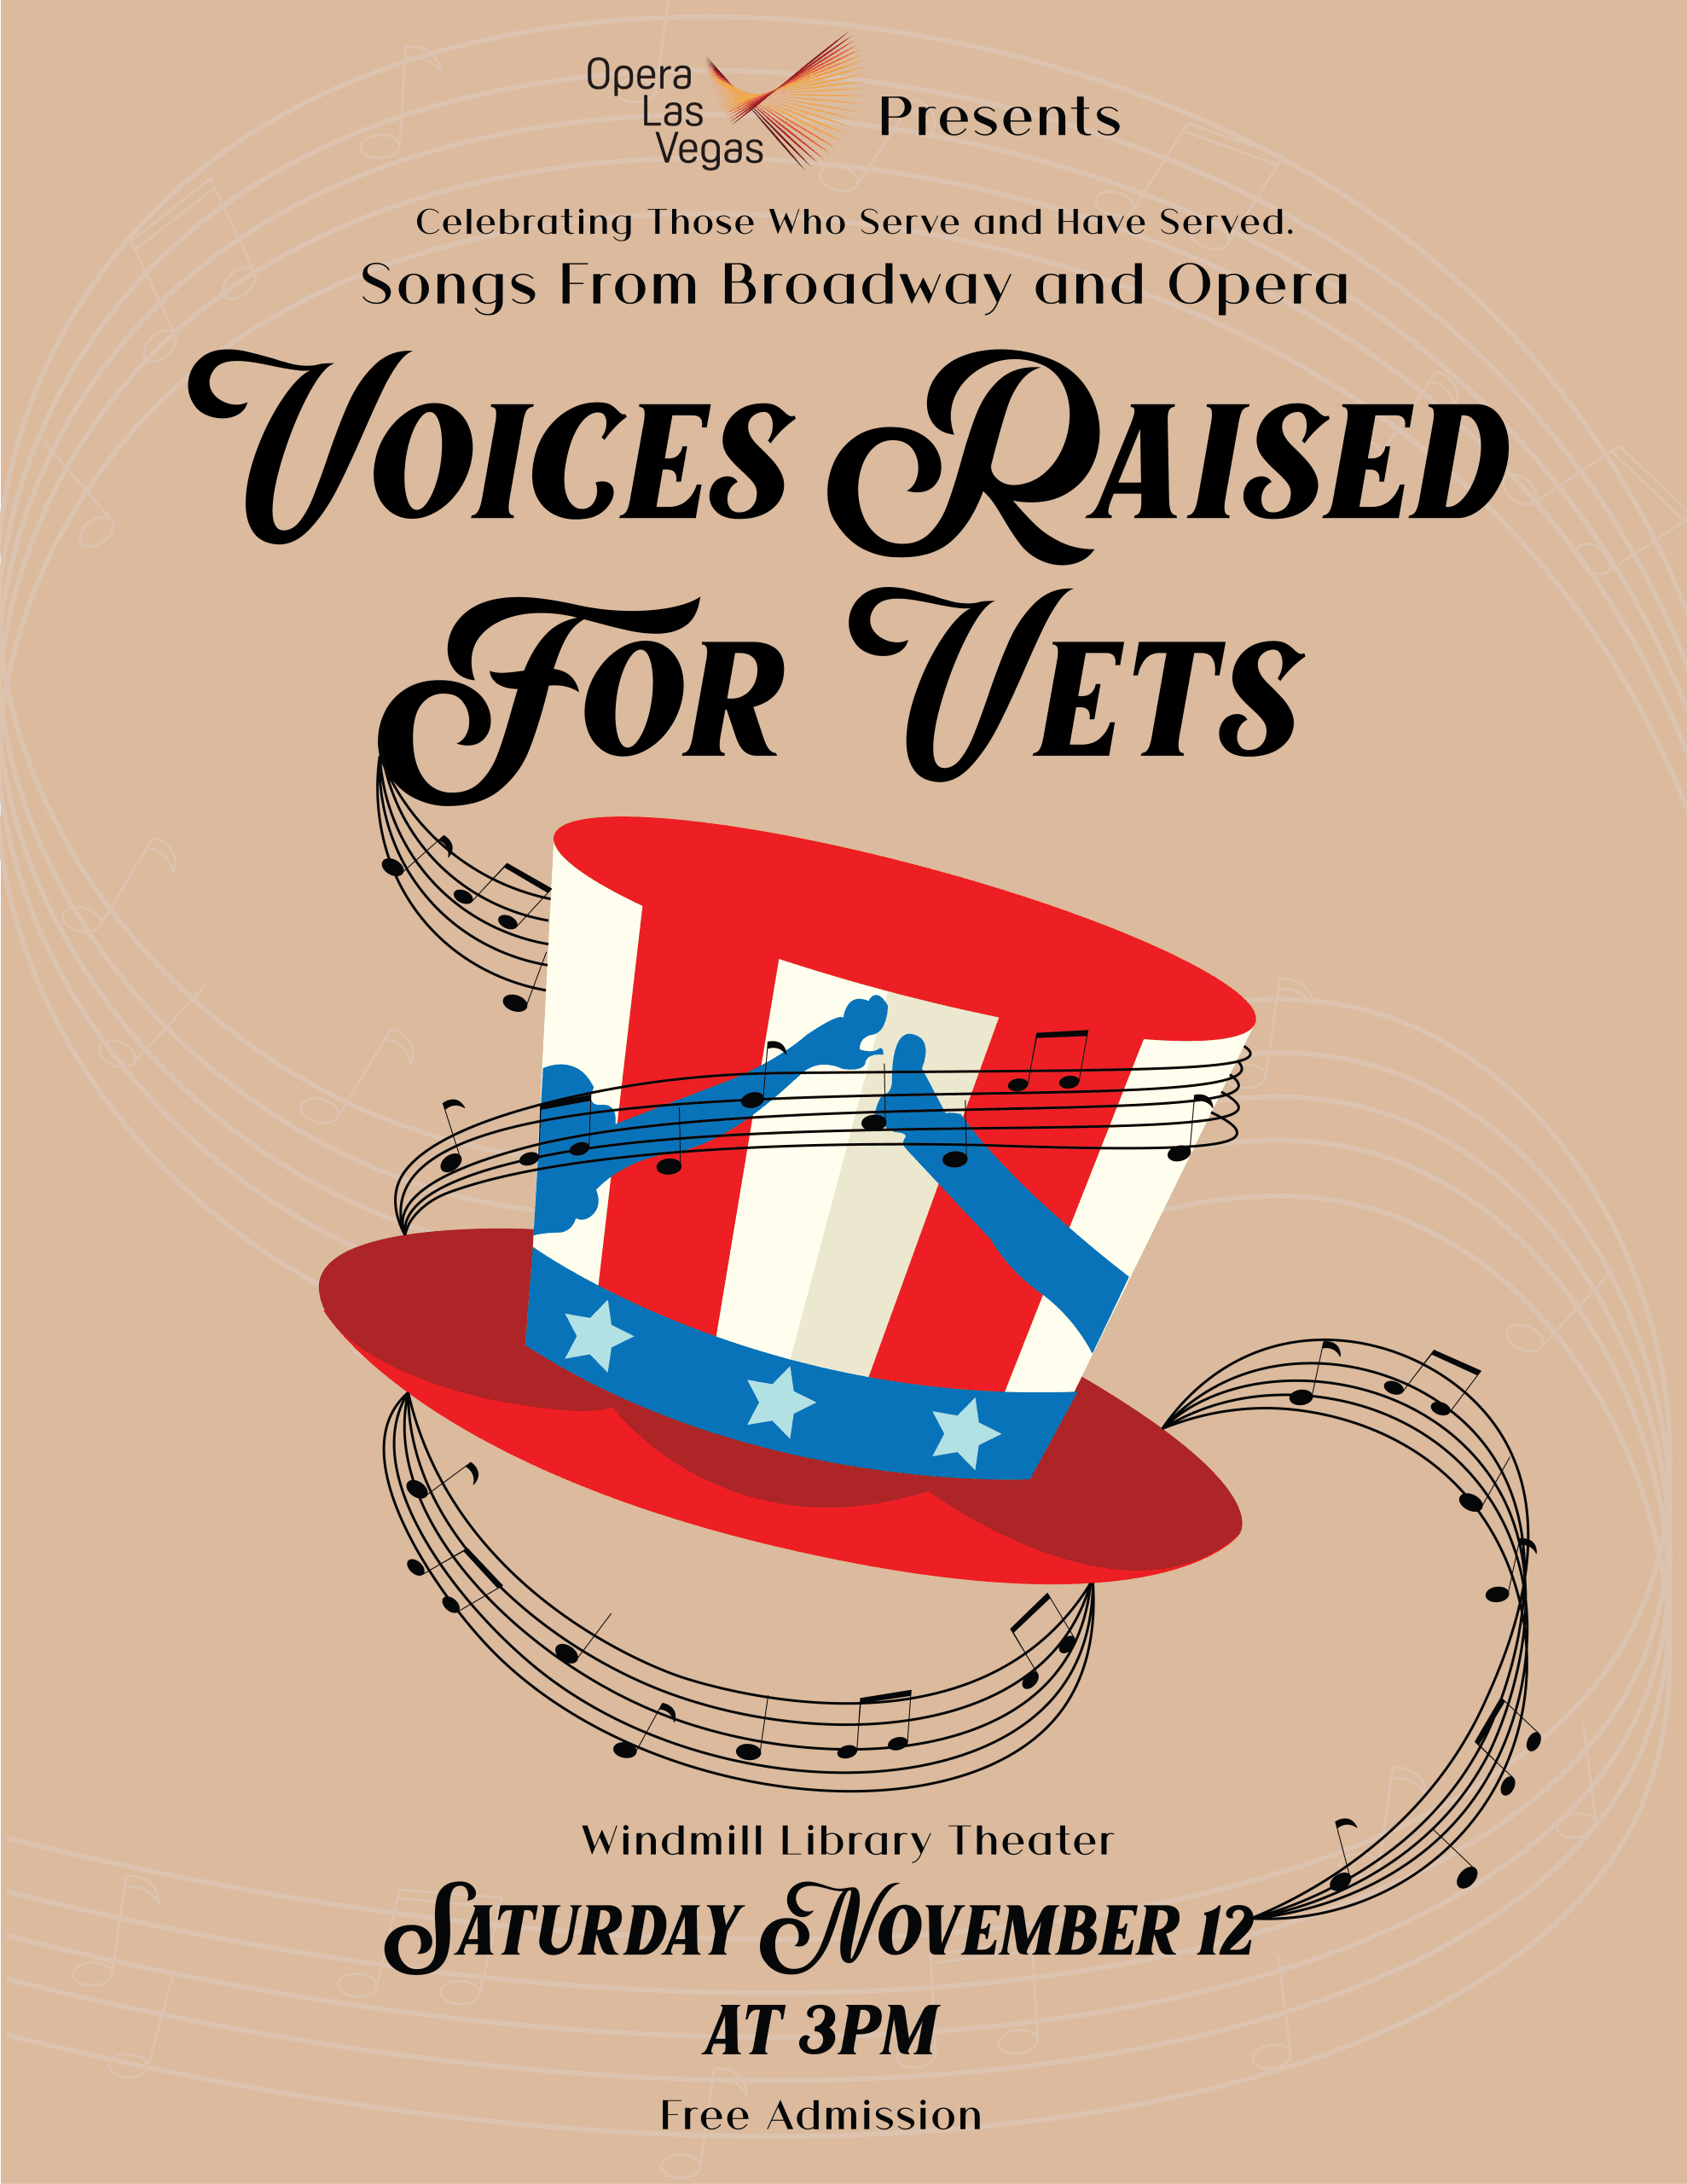 Voices Raised for Vets poster, featuring an Uncle Sam hat with swirling music notes surrounding it over a beige background.